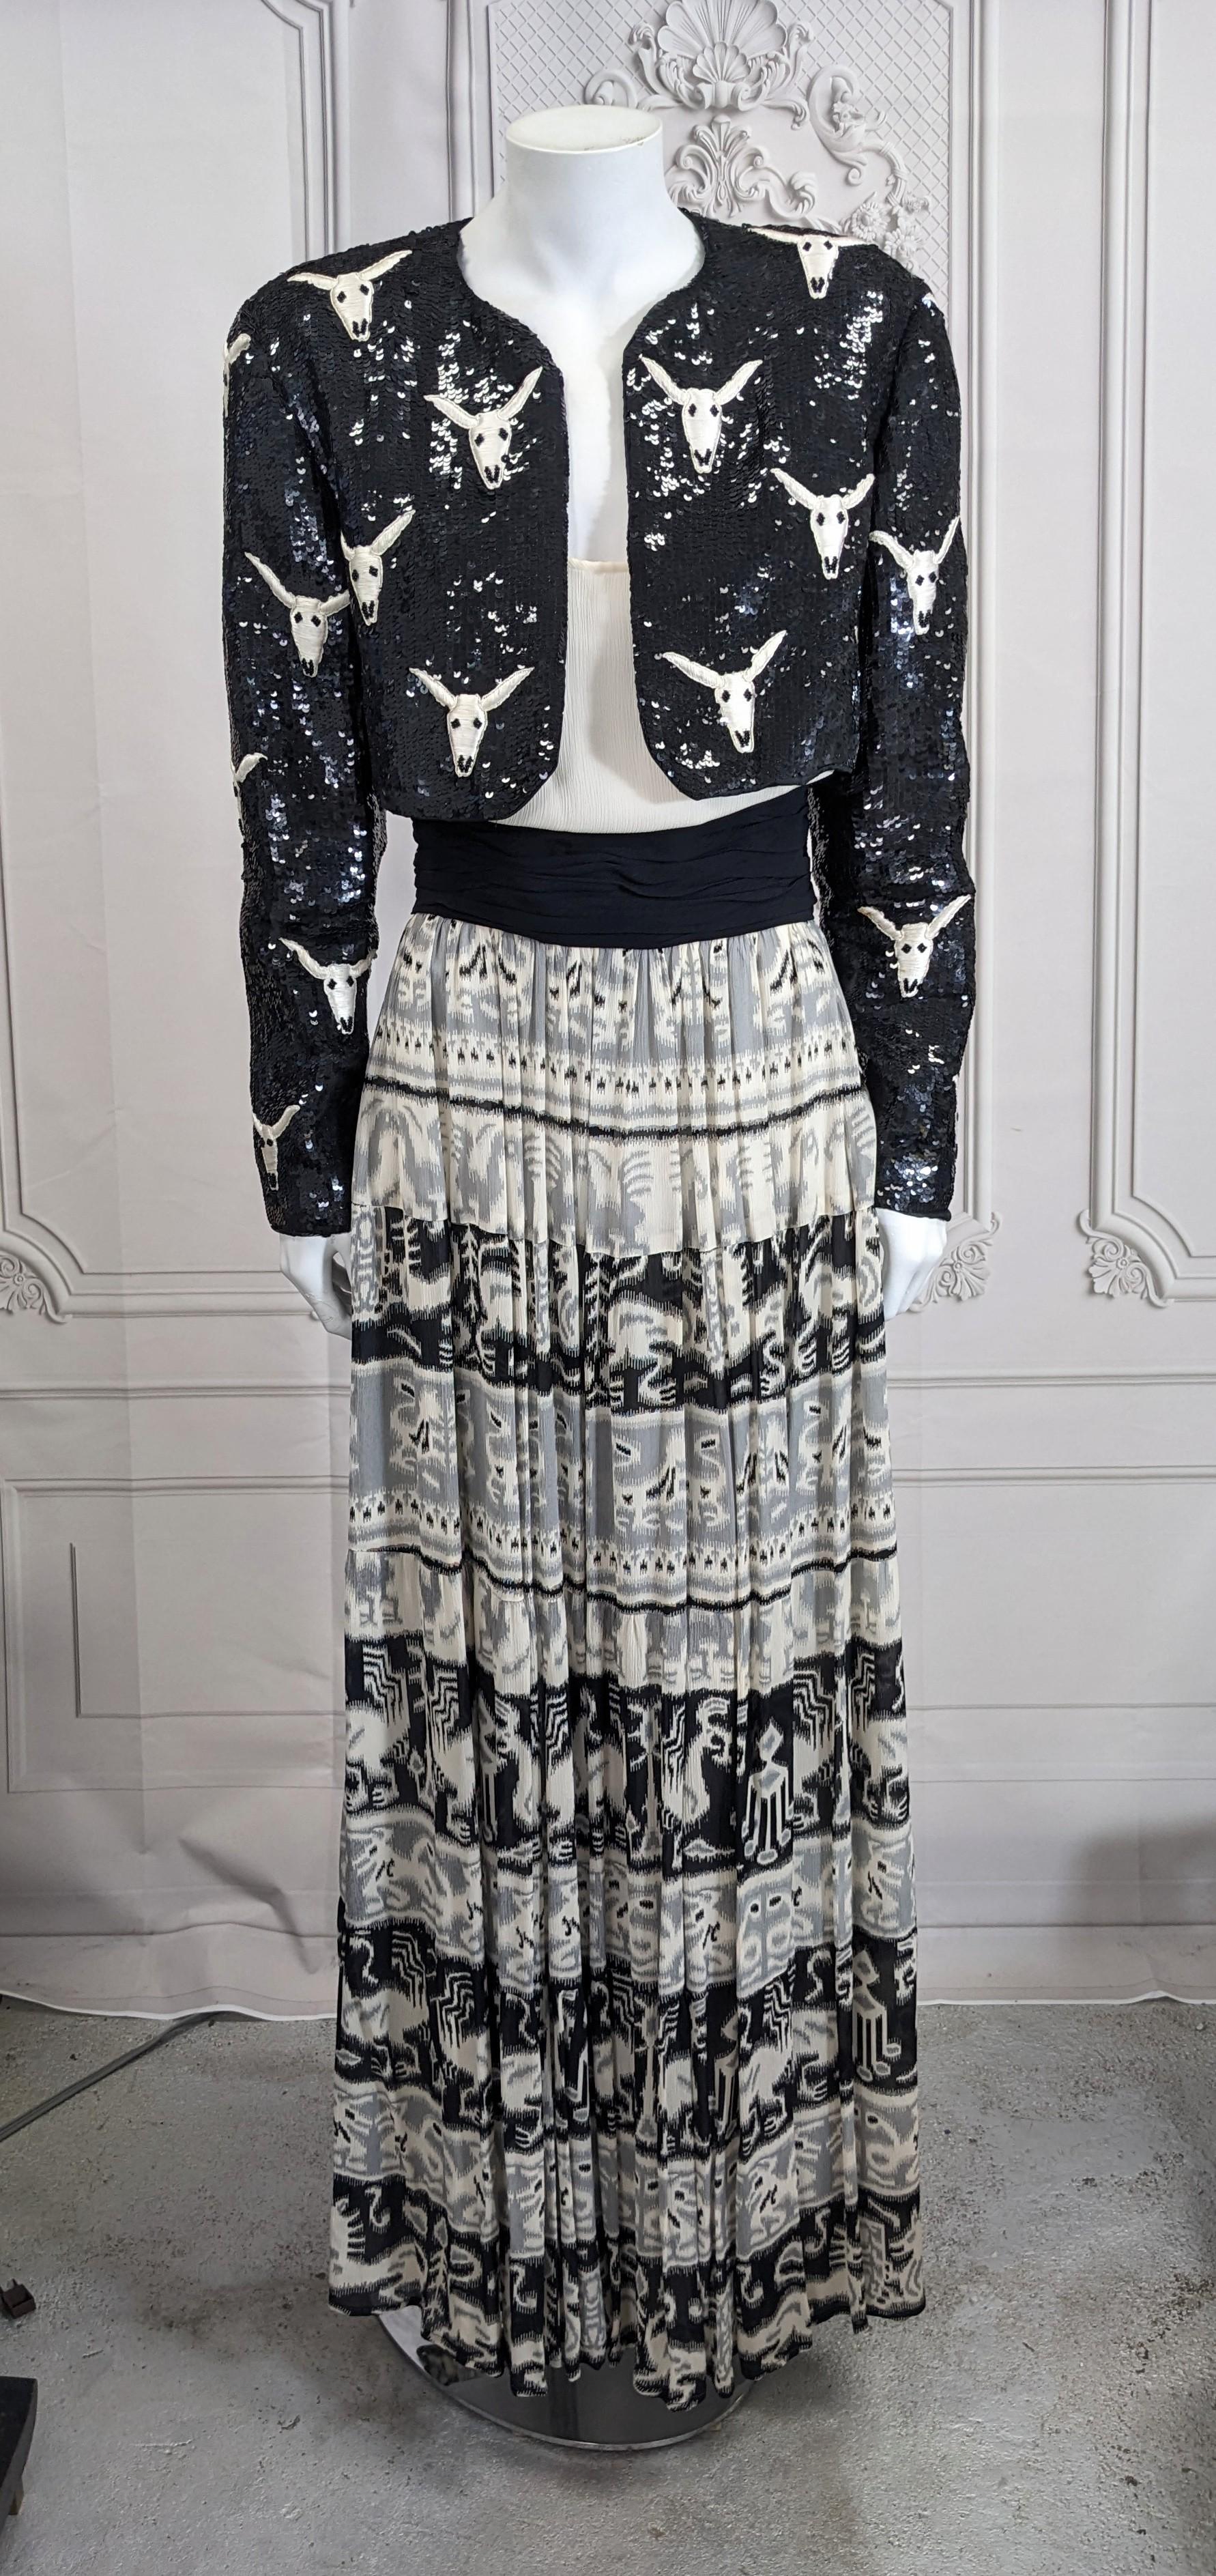 Dramatic Kevan Hall Couture Americana Themed Evening Ensemble from the 1990's. A sequin bolero with beaded and embroidered bison skulls is worn over a silk chiffon dress with native print ruffle skirt. Created by one of the few African American